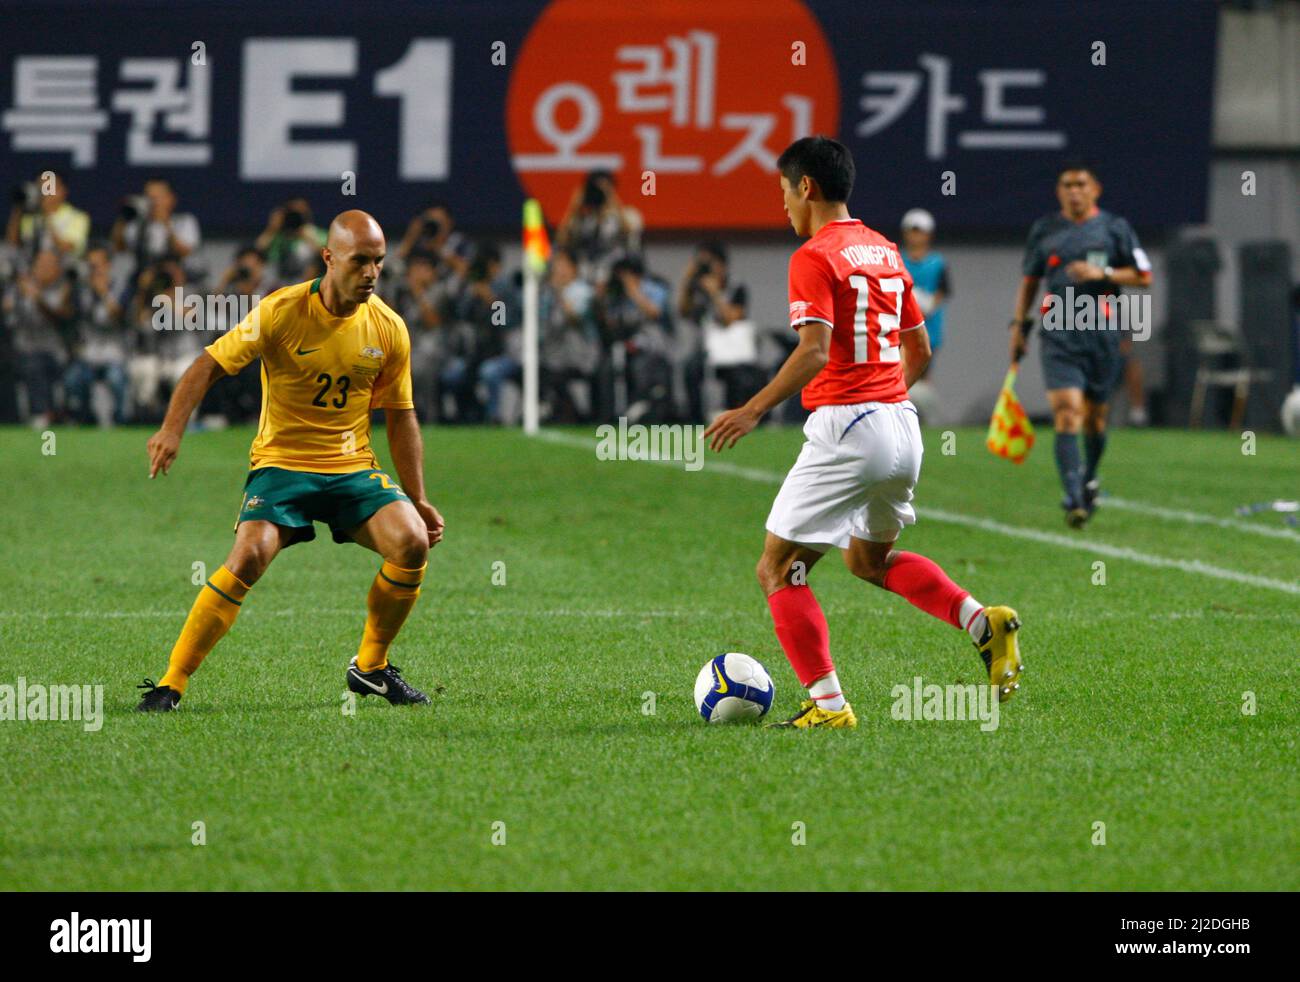 Sep 5, 2009-Seoul, South Korea-Mark Bresciano of Australia and Lee Young-Pyo of South Korea compete for the ball during the international friendly match between South Korea and the Australian Socceroos at Seoul World Cup Stadium on September 5, 2009 in Seoul, South Korea. Stock Photo